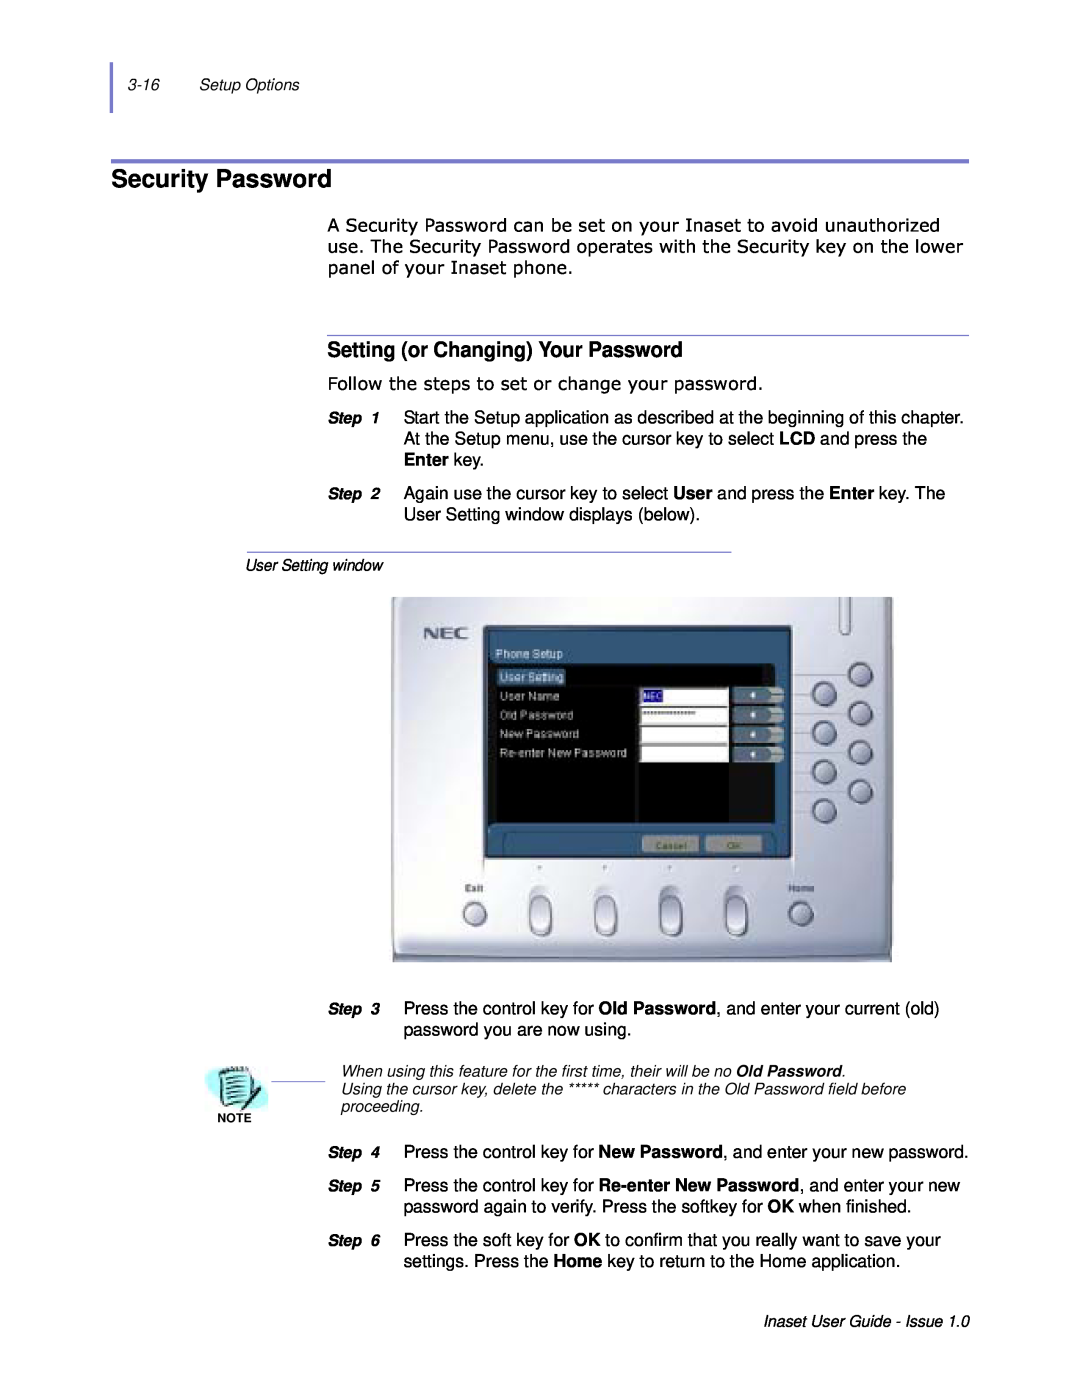 NEC NEAX 2000 IPS manual Security Password, Setting or Changing Your Password, Enter key 